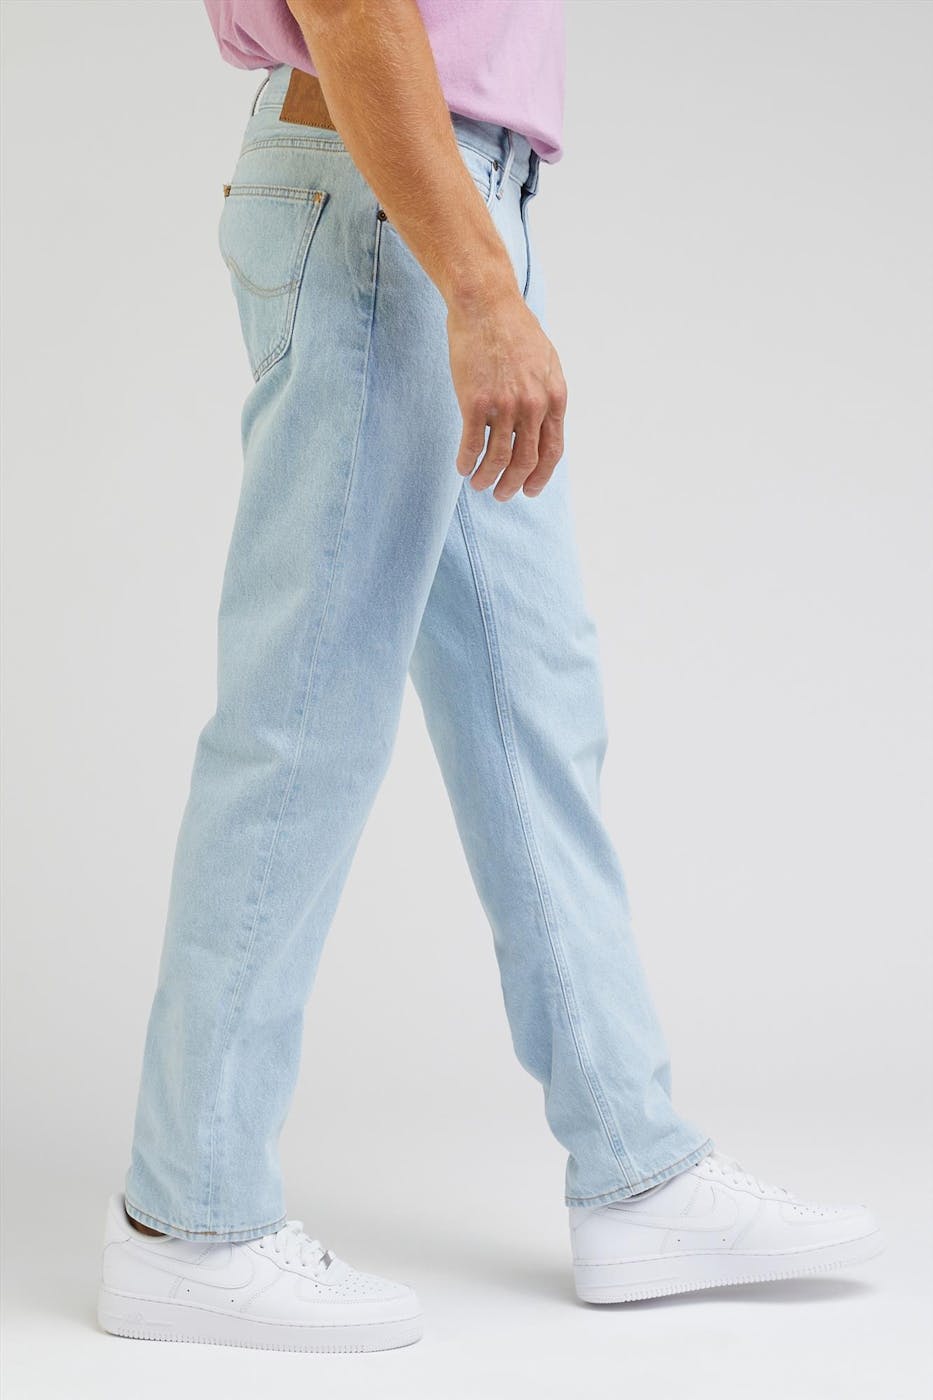 Lee - Lichtblauwe West Relaxed jeans